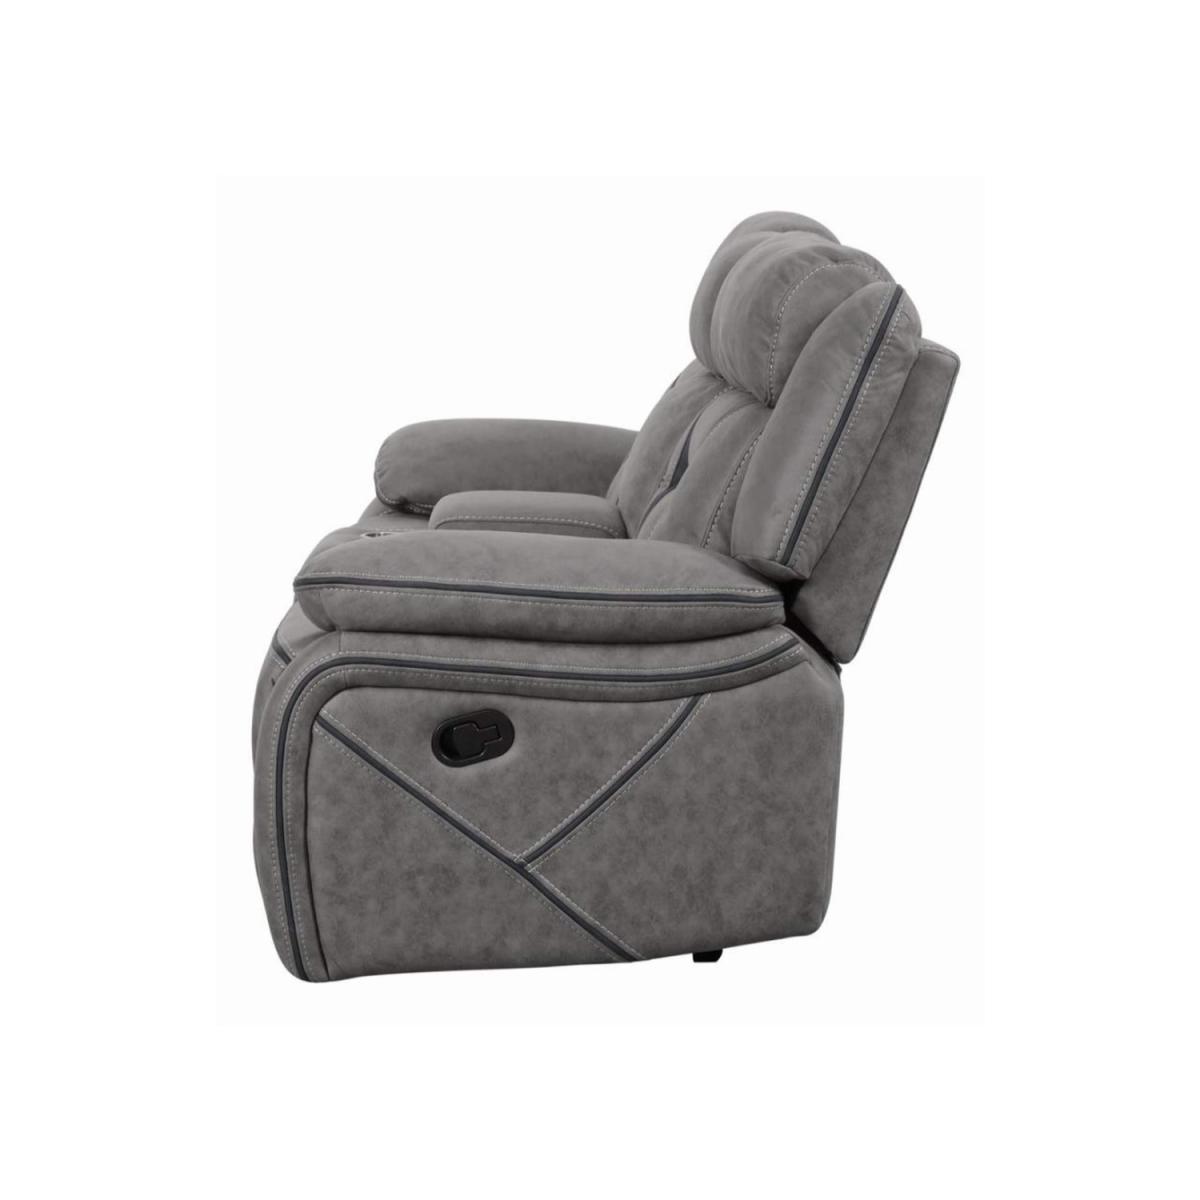 SILLON RECLINABLE HIGGINS 2 PERS. GRIS